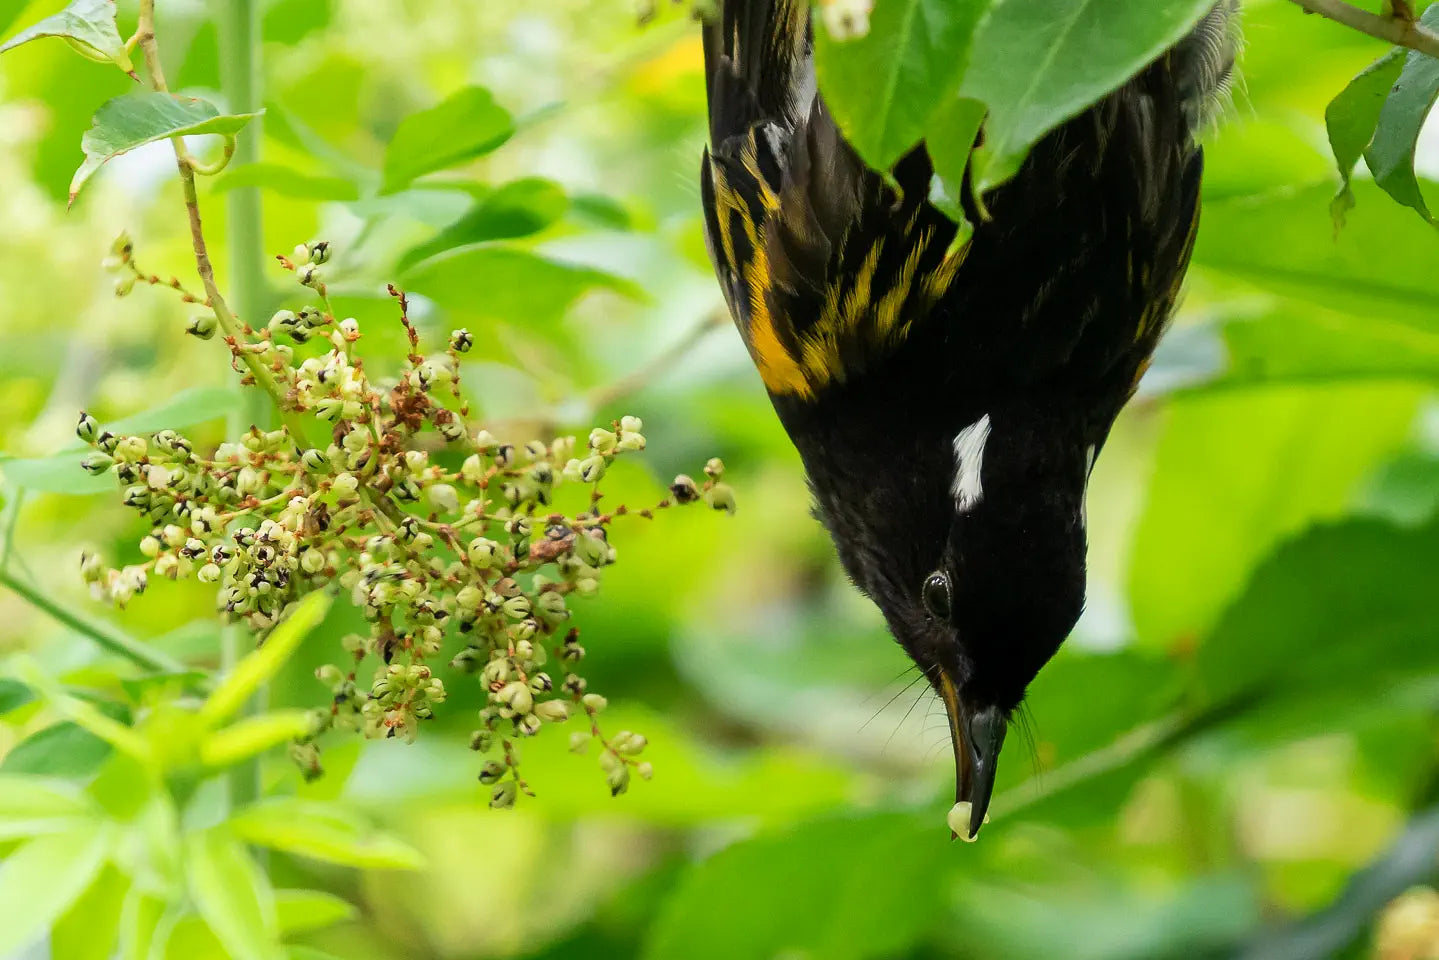 A male hihi hanging upside down with a berry in its beak next to a spray of muhlenbekia berries.